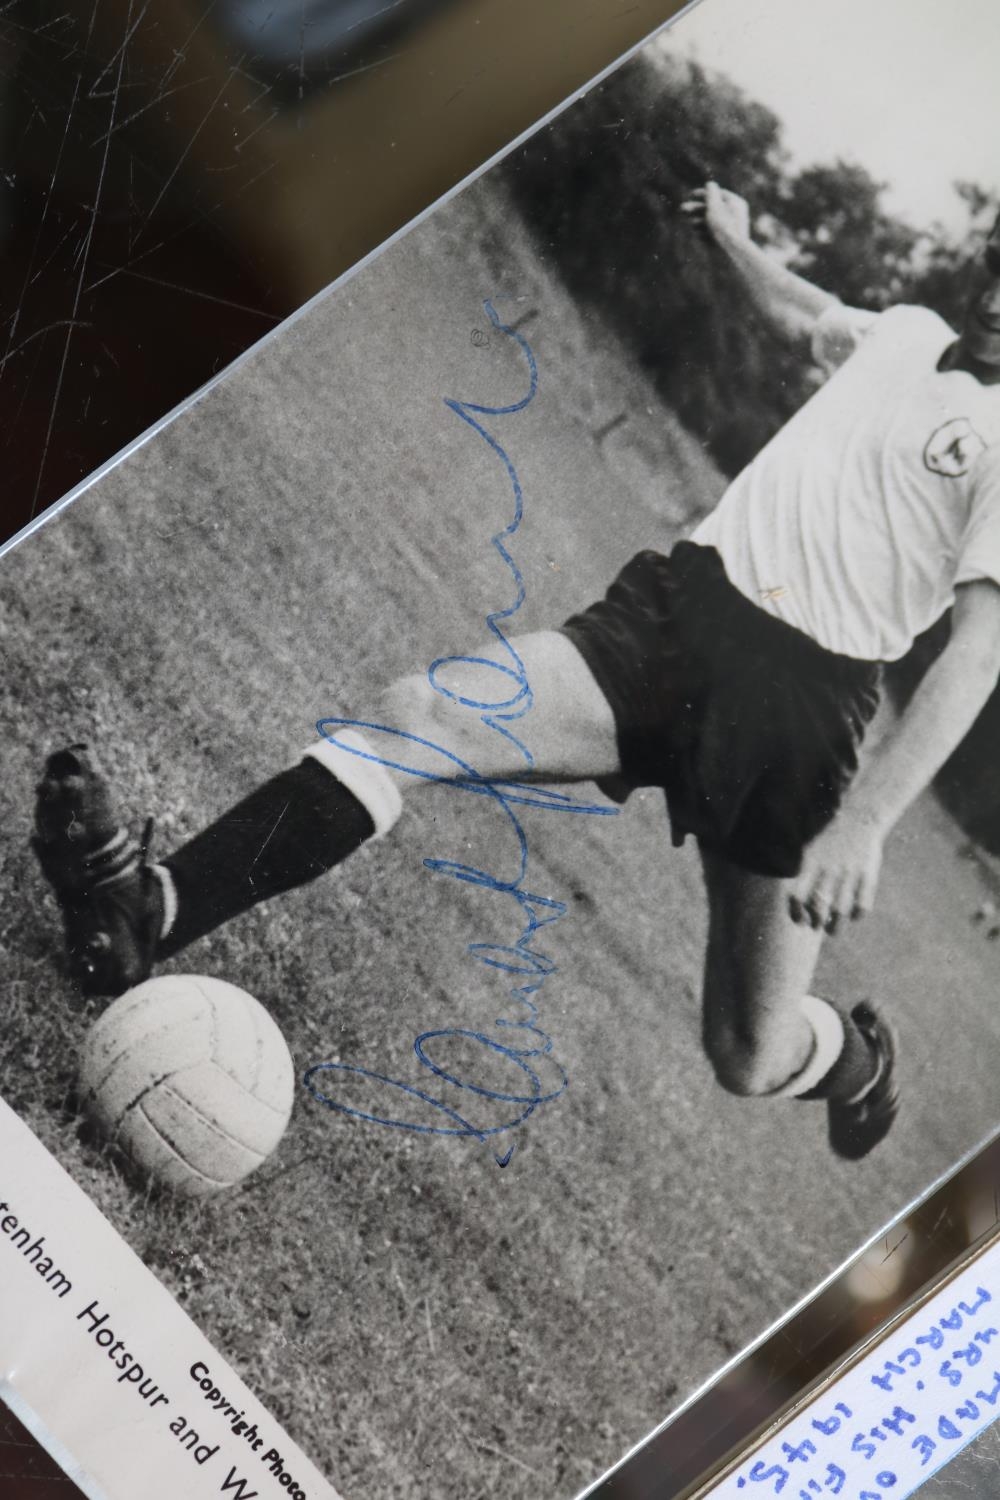 Cliff jones Signed Photo, Jimmy Greaves Sepia & William John Whateley - Image 2 of 2